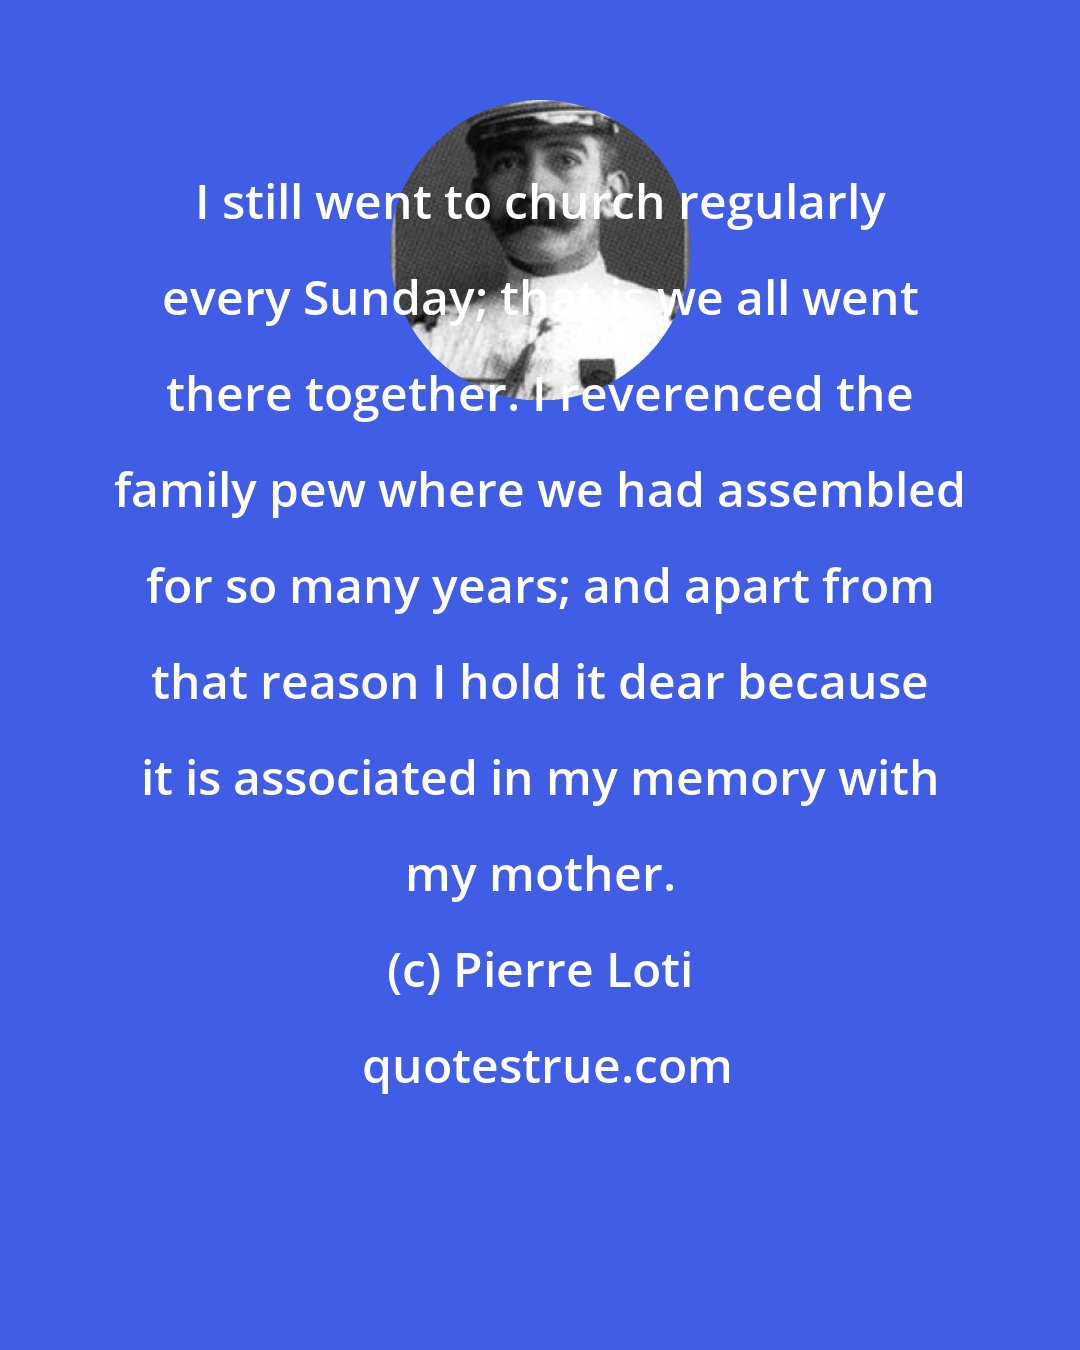 Pierre Loti: I still went to church regularly every Sunday; that is we all went there together. I reverenced the family pew where we had assembled for so many years; and apart from that reason I hold it dear because it is associated in my memory with my mother.